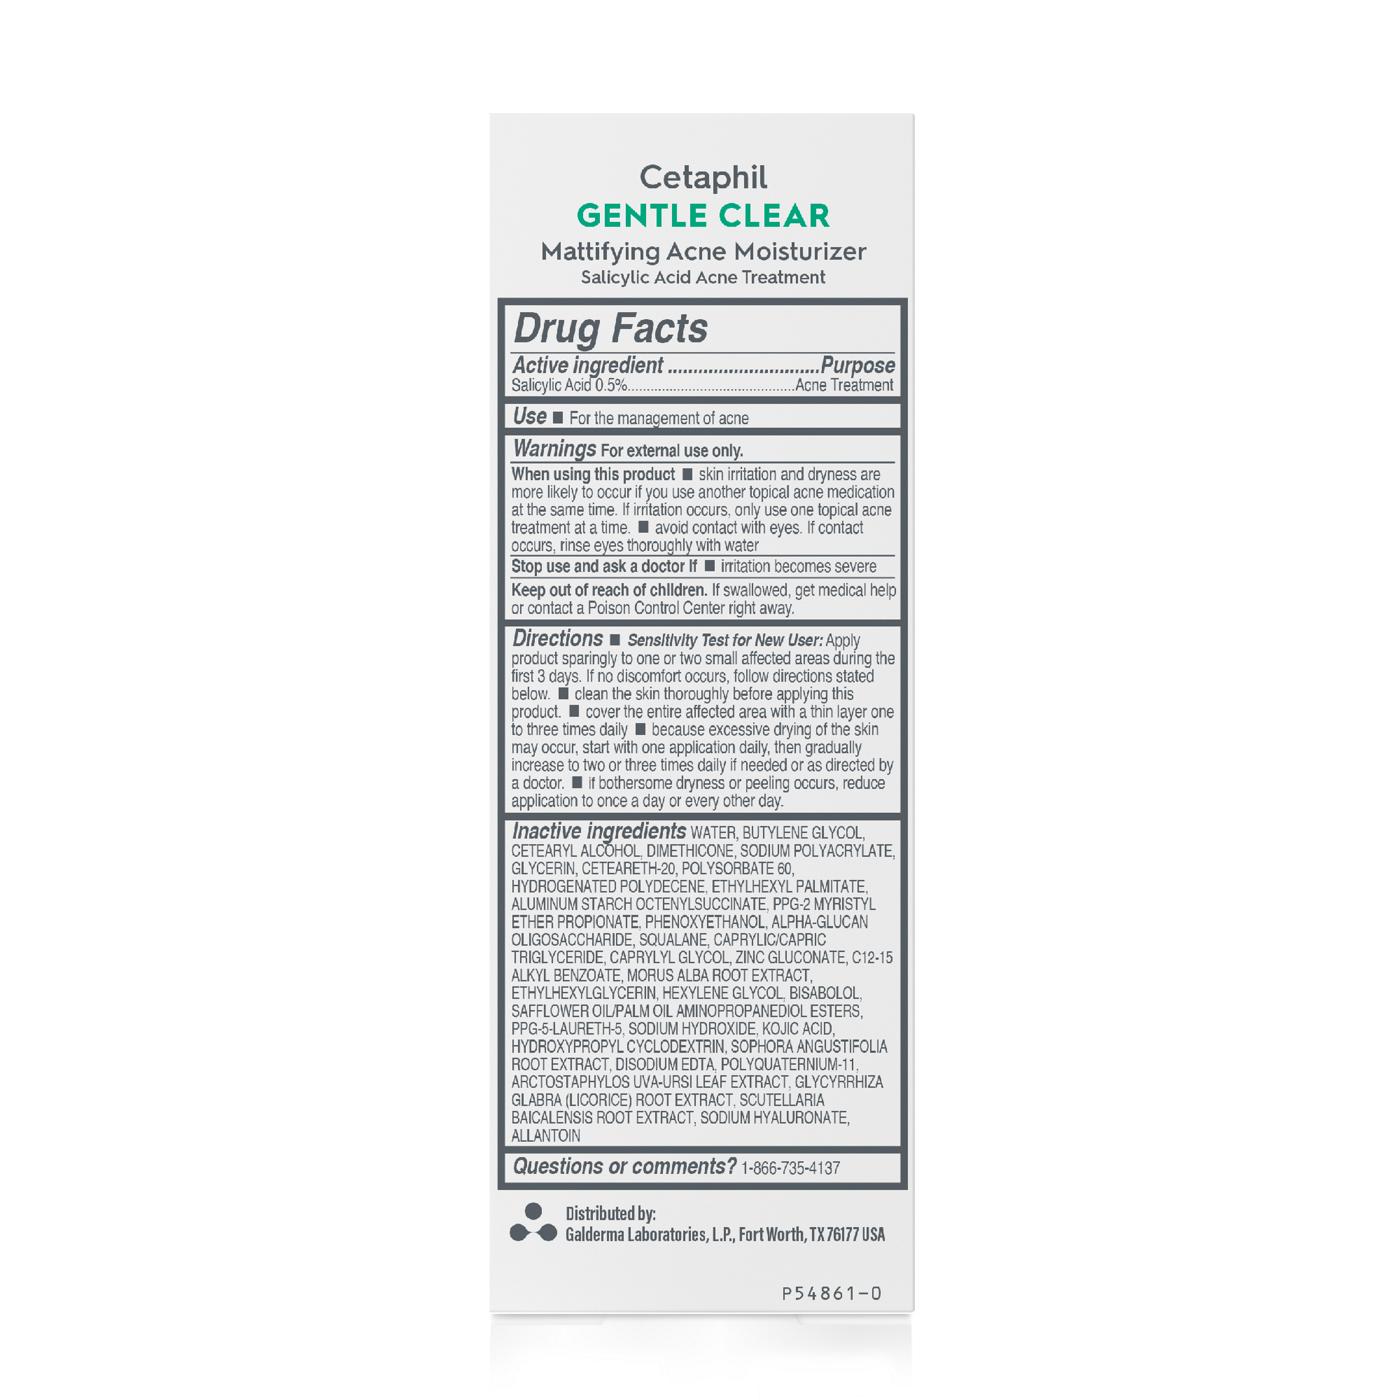 Cetaphil Gentle Clear Mattifying Acne Moisturizer; image 8 of 11